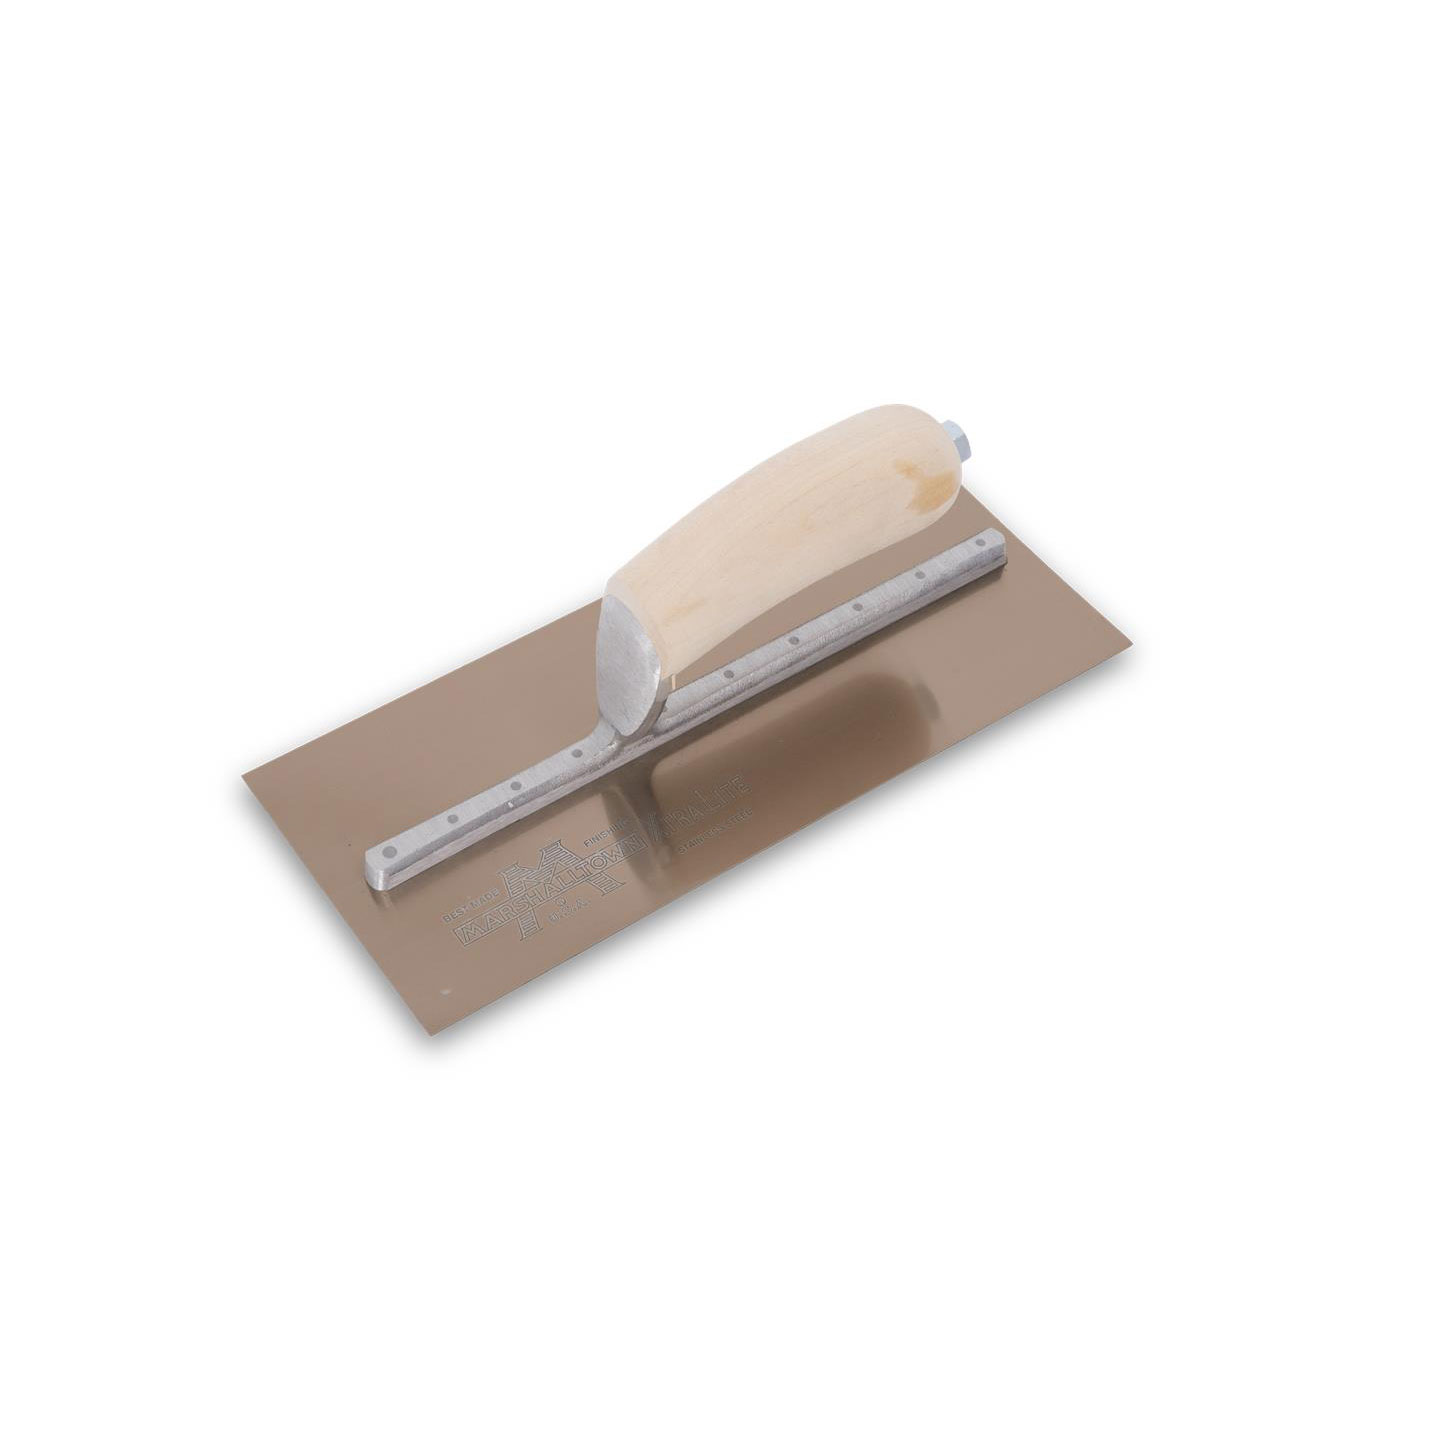 Marshalltown MXS3GS 11in x 4-3/4in Golden Stainless Finishing Trowel with Curved Wood Handle MXS3GS